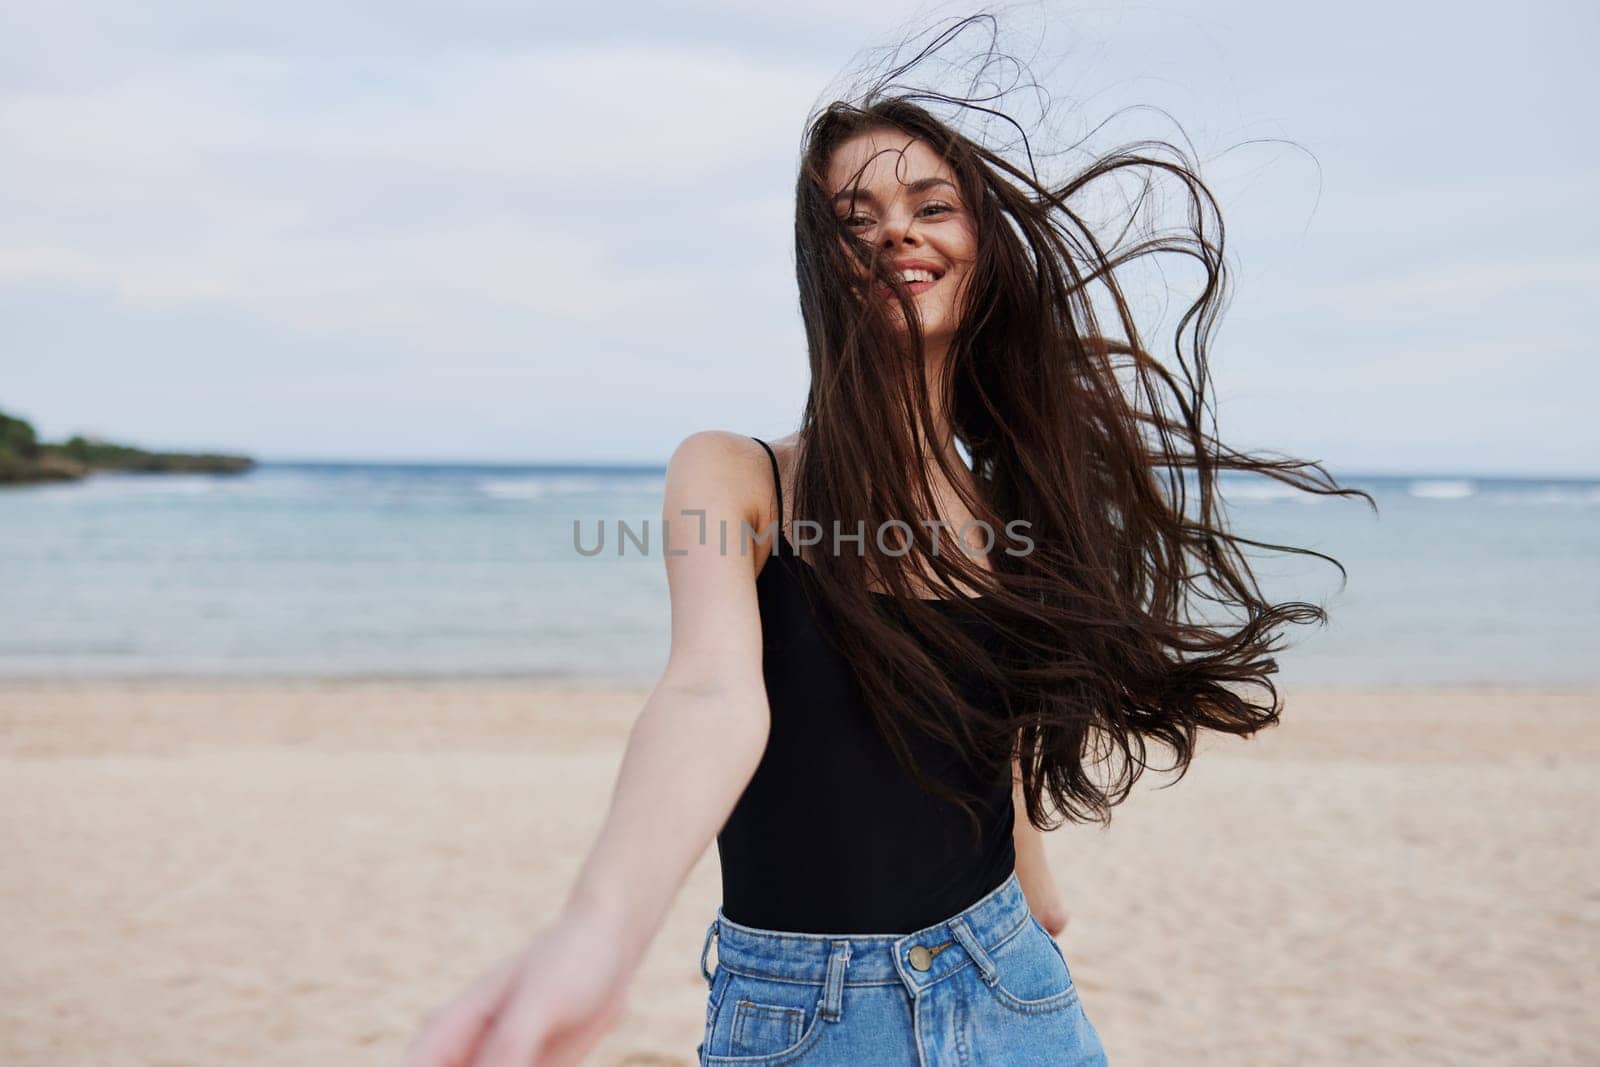 woman hair beach vacation young freedom summer active activity wave running flight female sunset lifestyle smile walking travel sea beautiful person